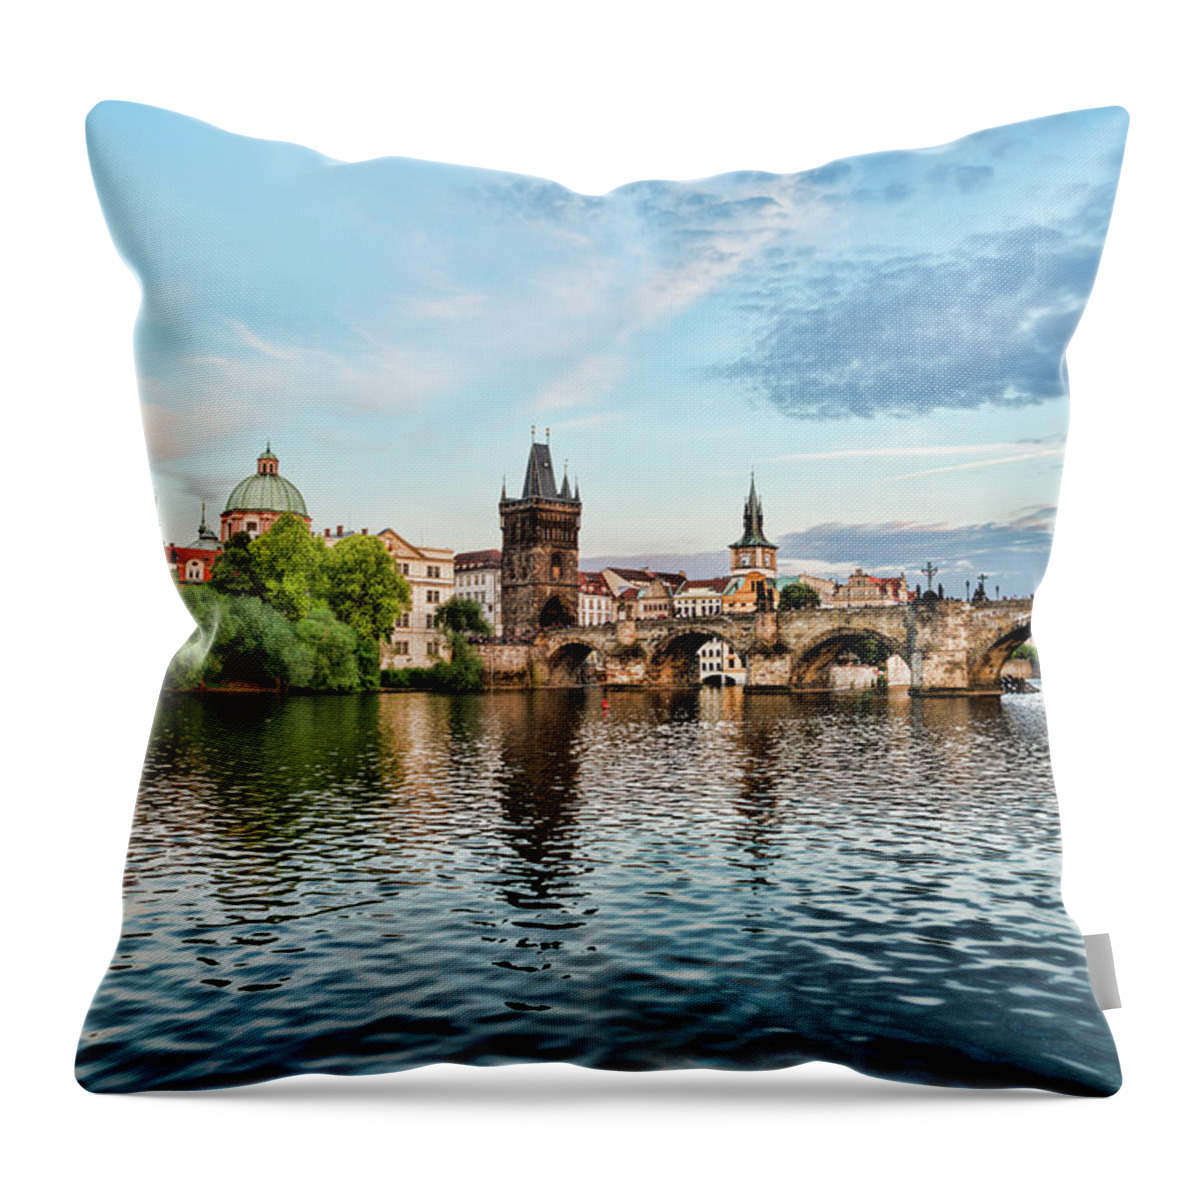 Central Europe Throw Pillow featuring the photograph Prague From the River by Sharon Popek